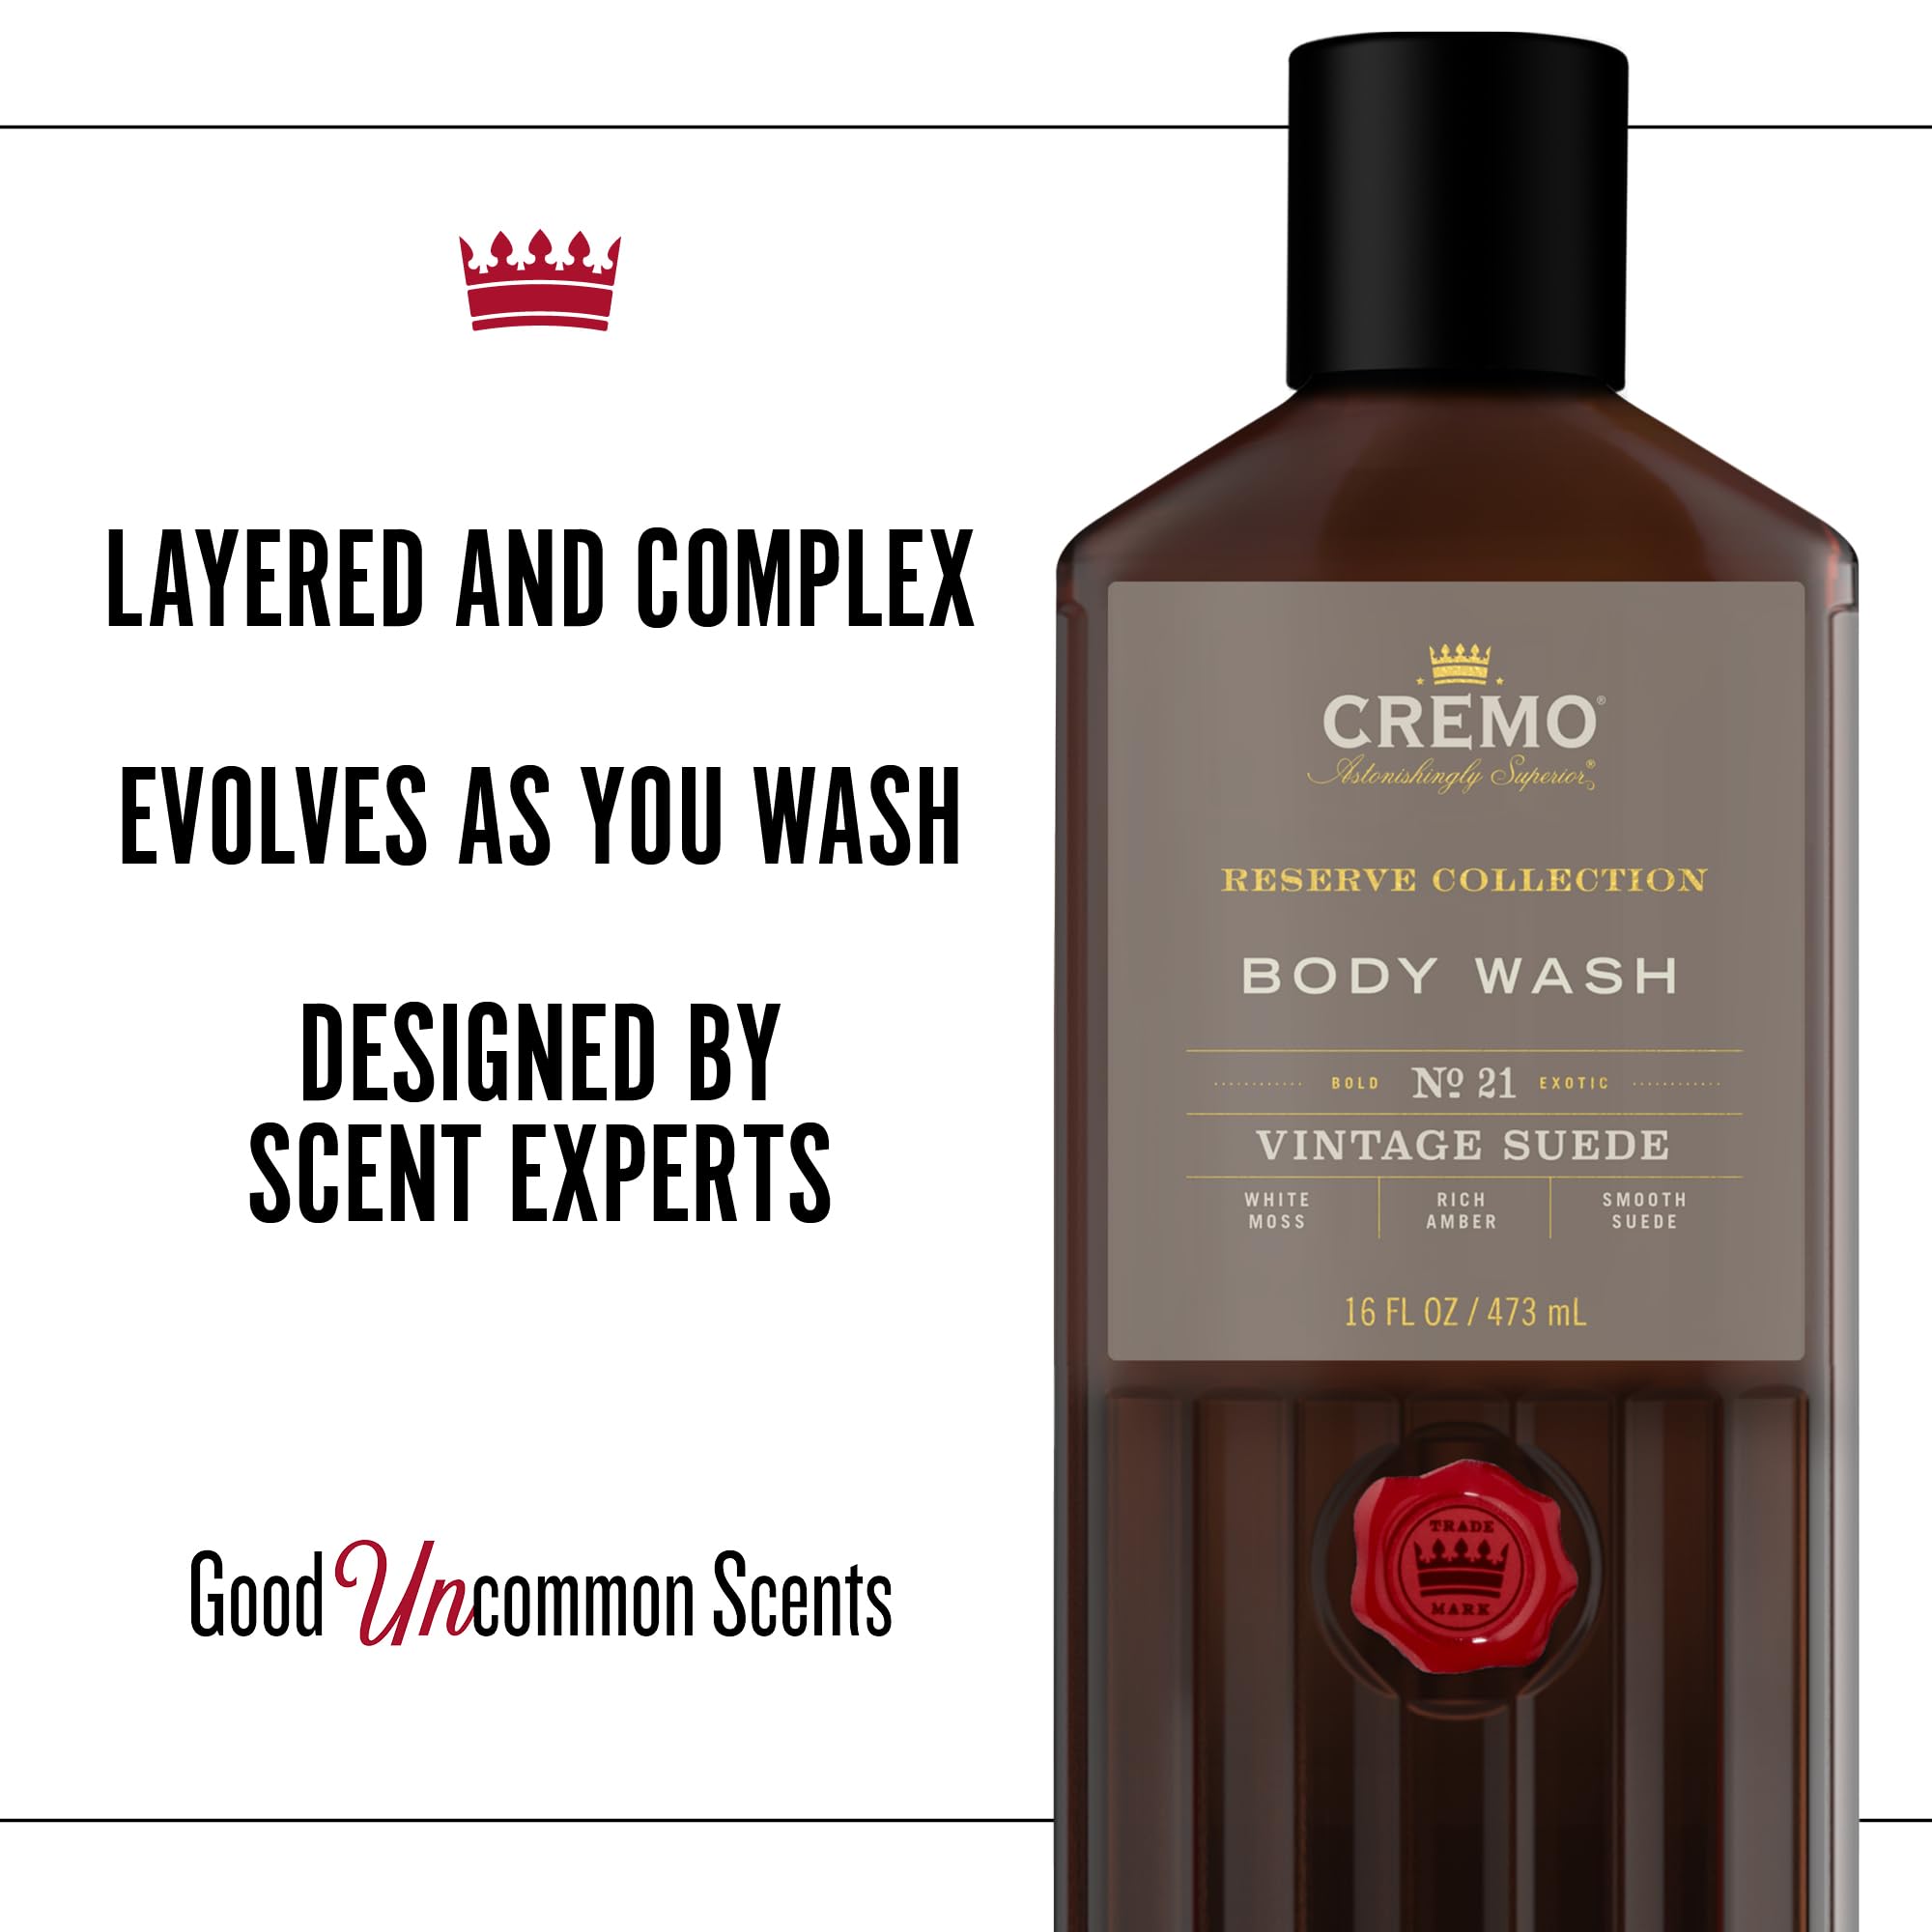 Cremo Rich-Lathering Vintage Suede Body Wash, A Vintage Suede with Notes of White Moss and Rich Amber, 16 Fl Oz